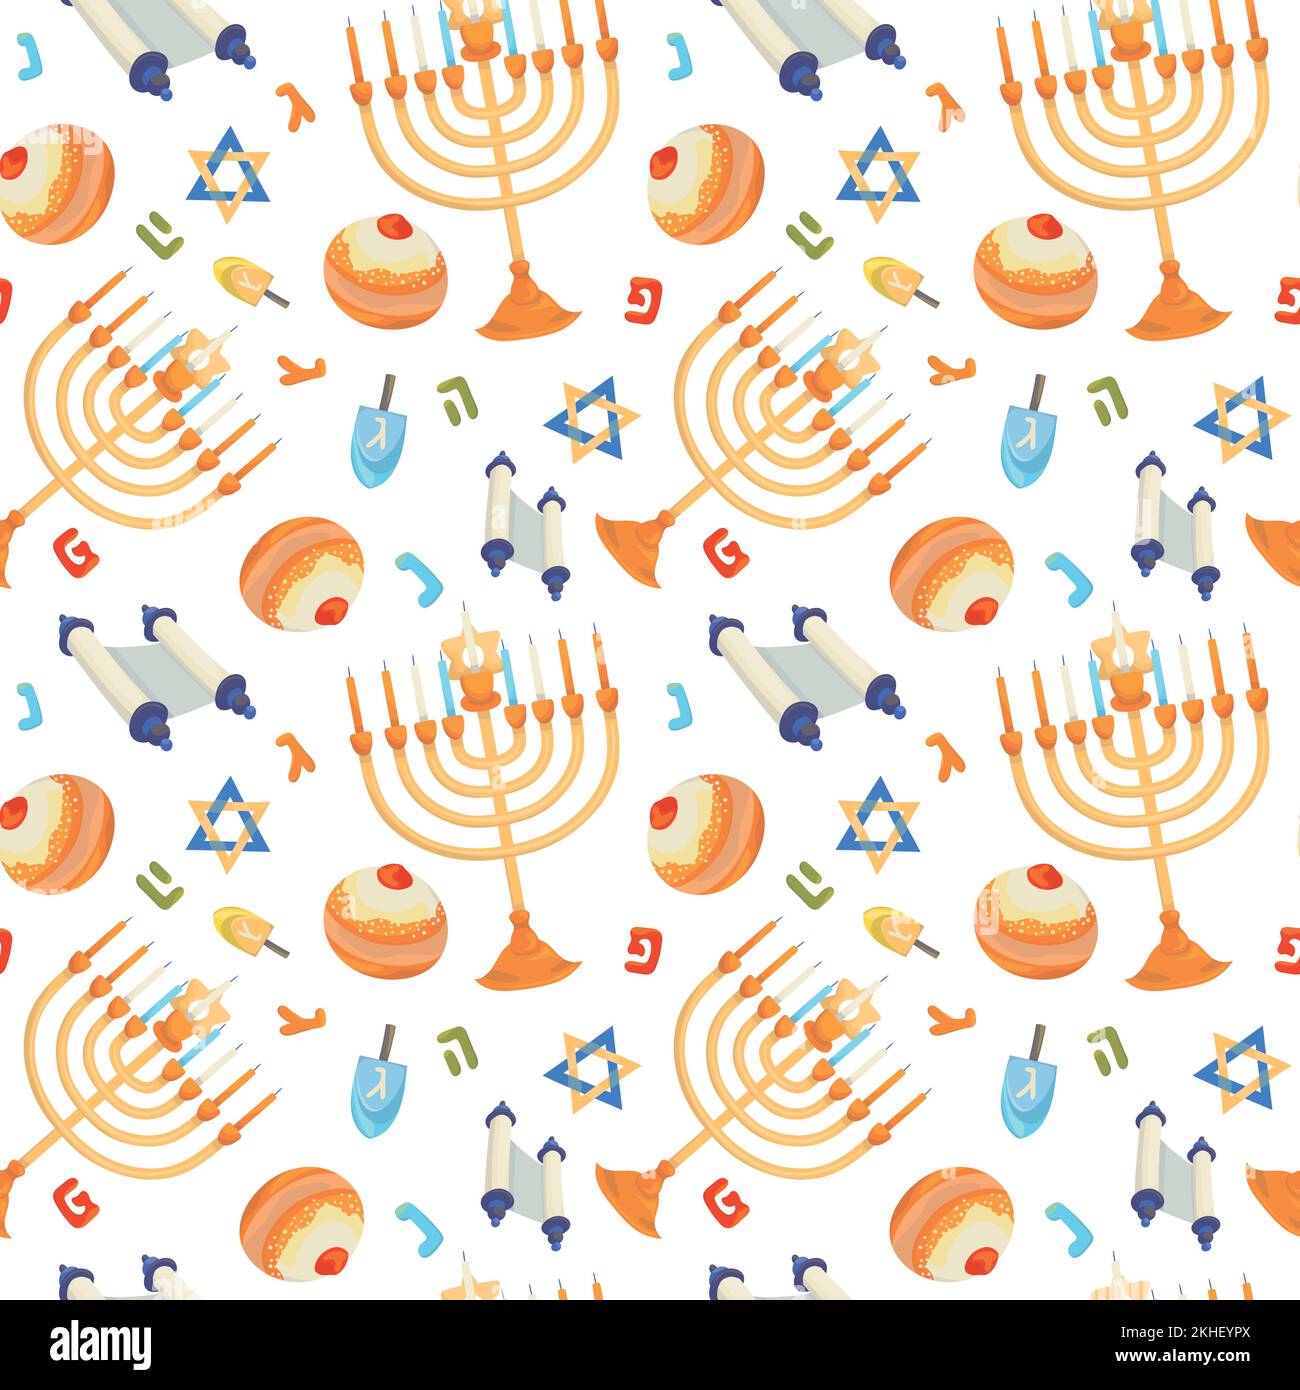 Colorful repetitive pattern background for the Jewish festival of Hanukkah, made of simple vector illustrations. Stock Vector